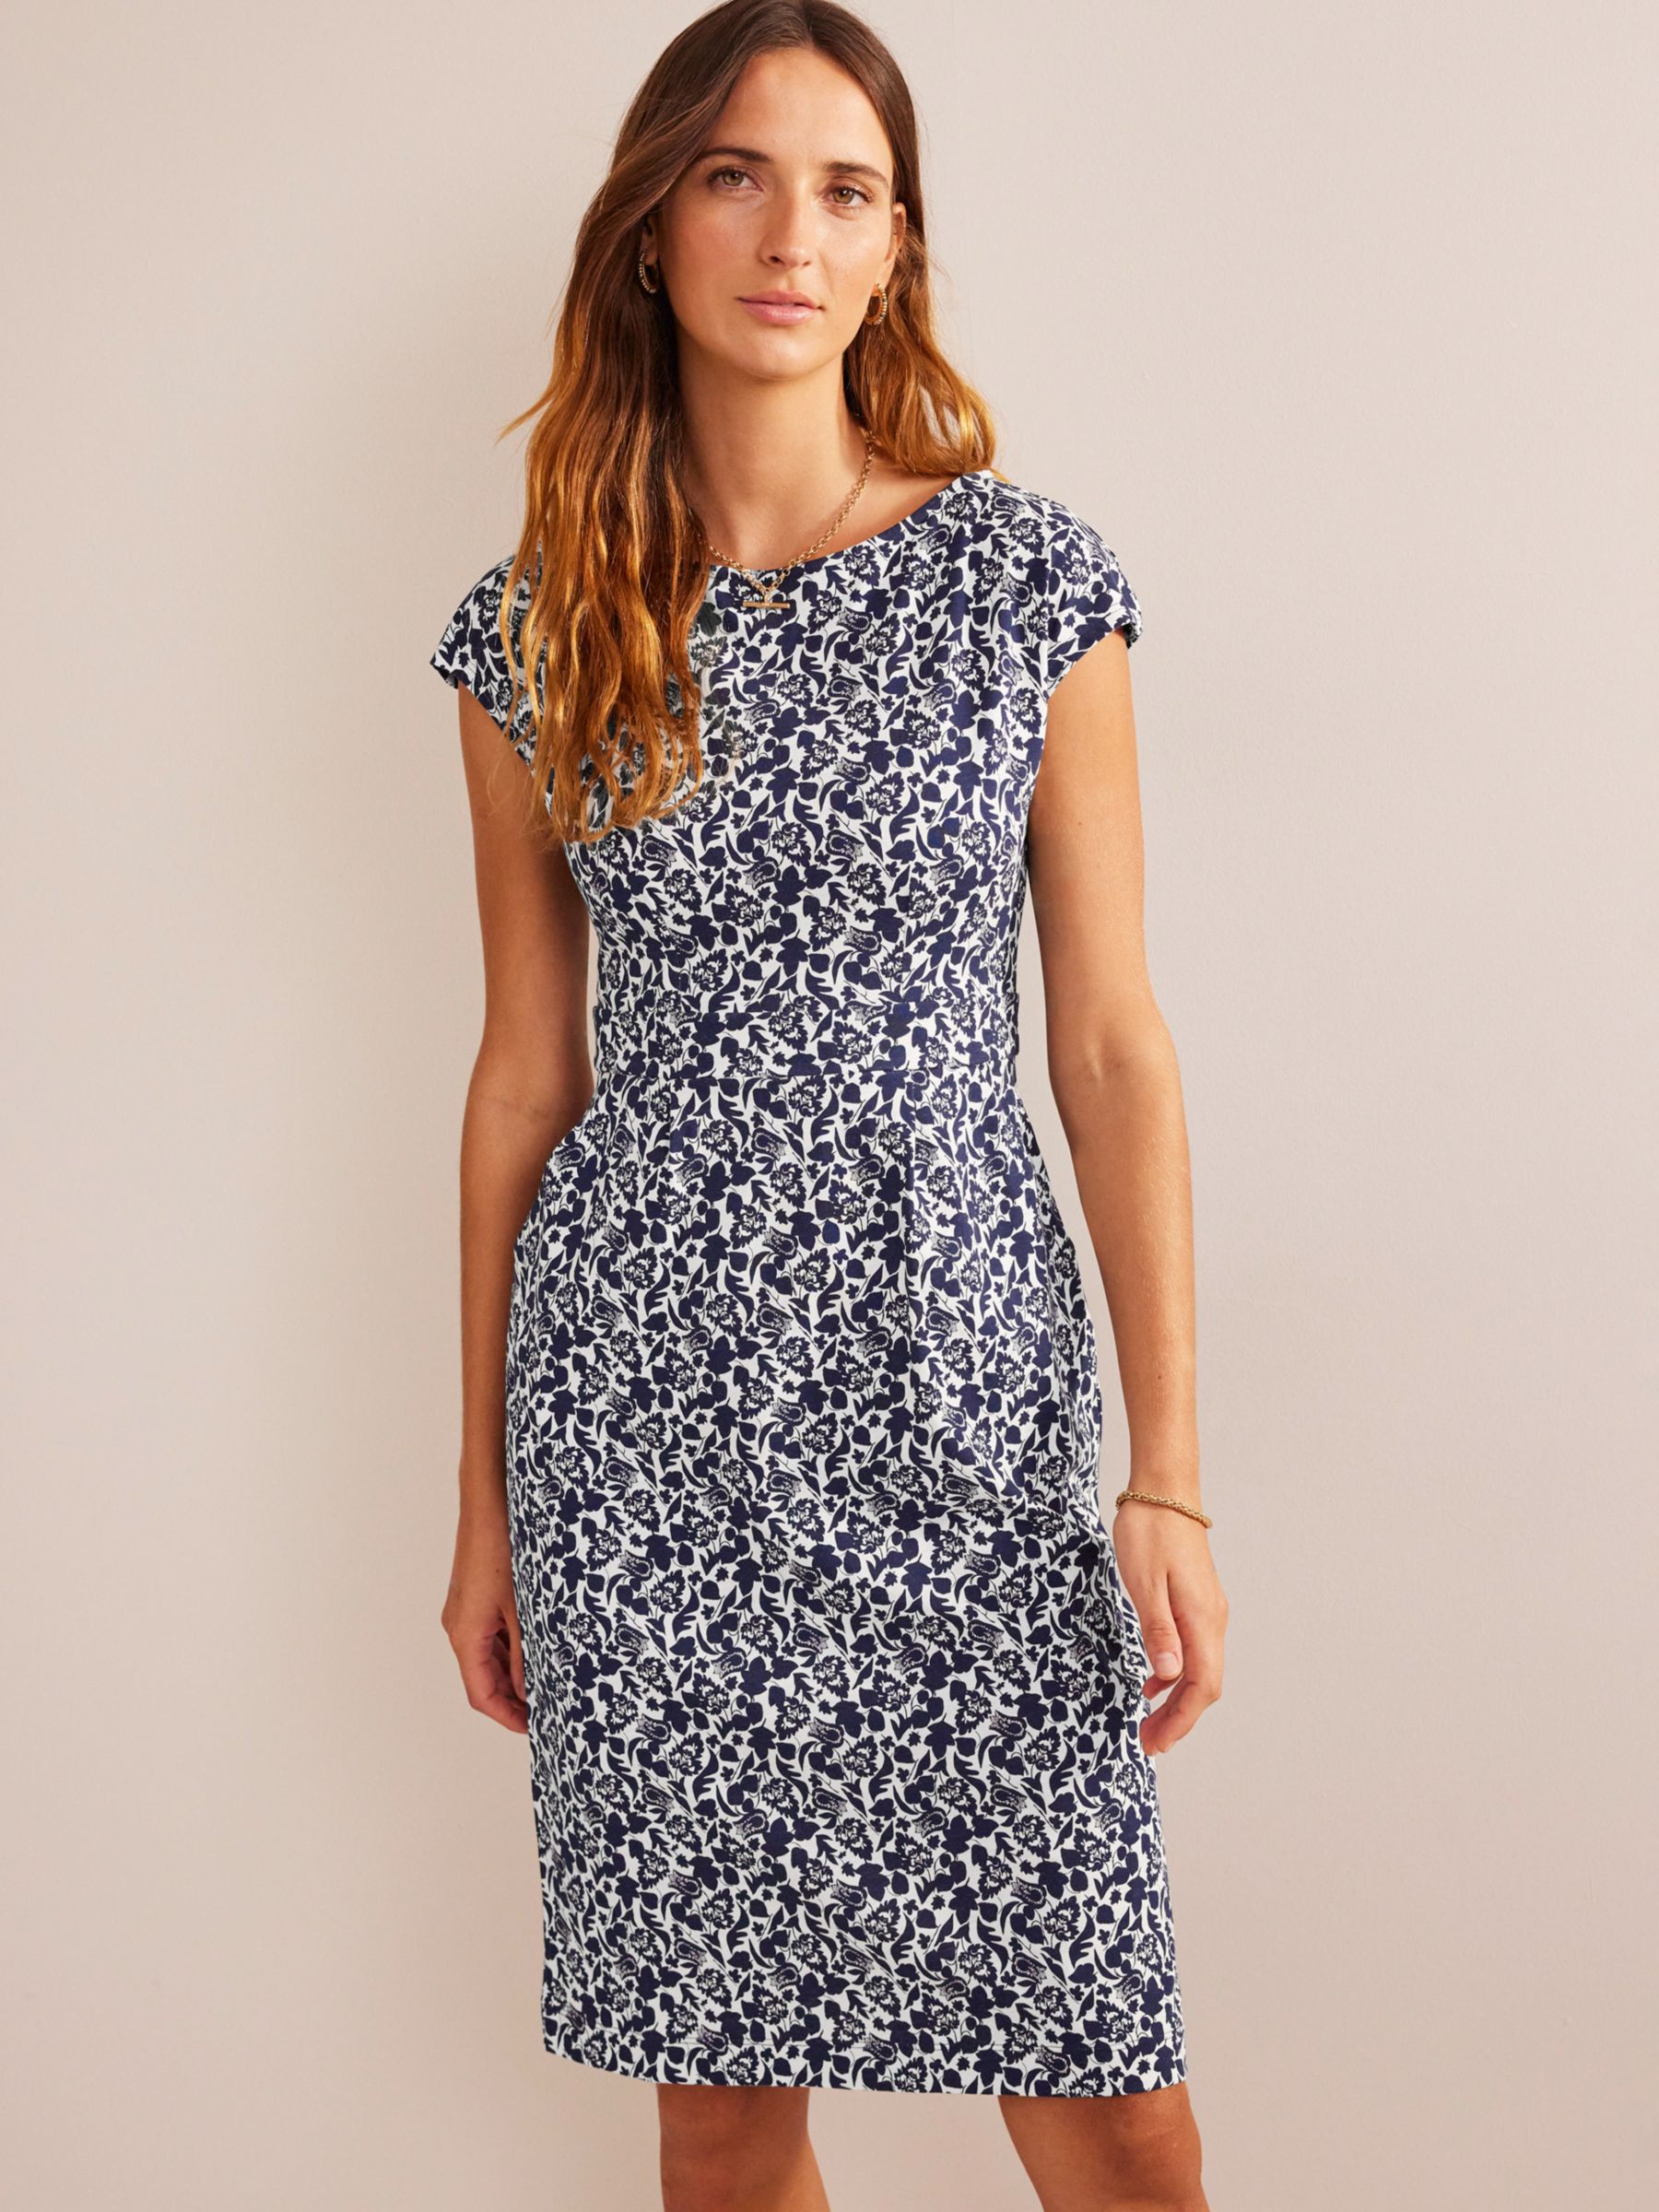 Boden Florrie Jersey Dress, French Navy at John Lewis & Partners